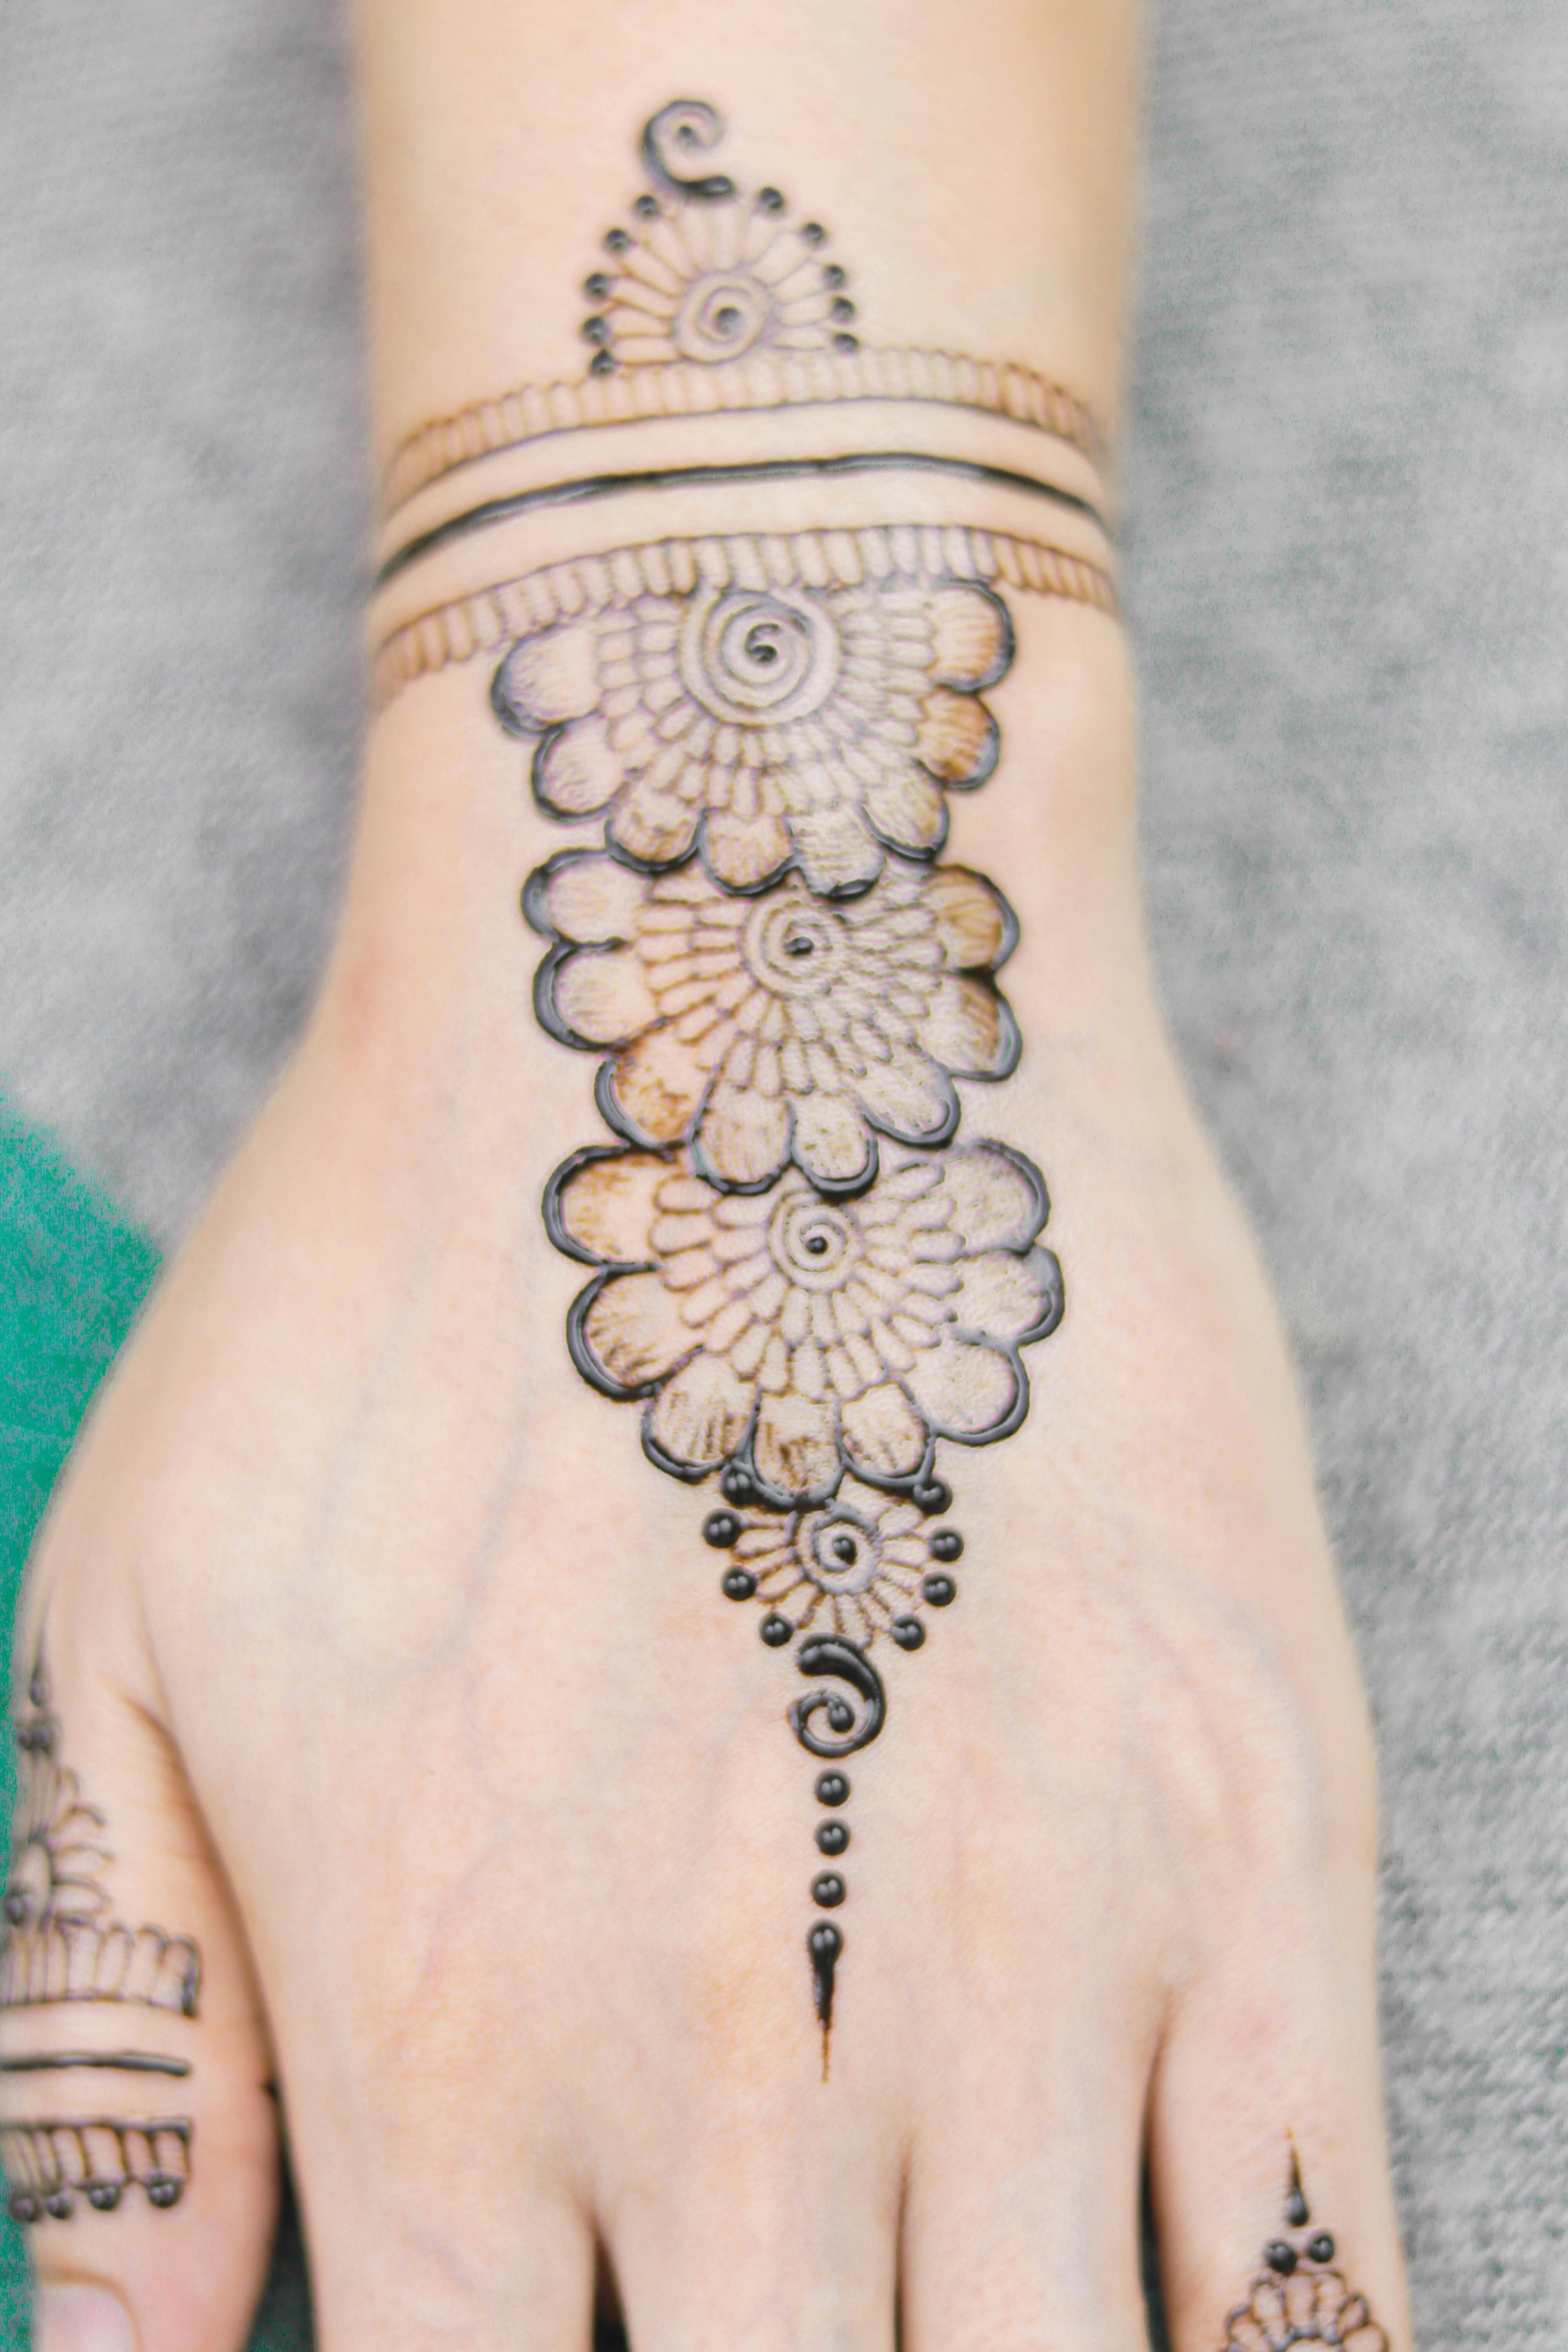 Picture Of Hand With Mehndi Tattoo · Free Stock Photo